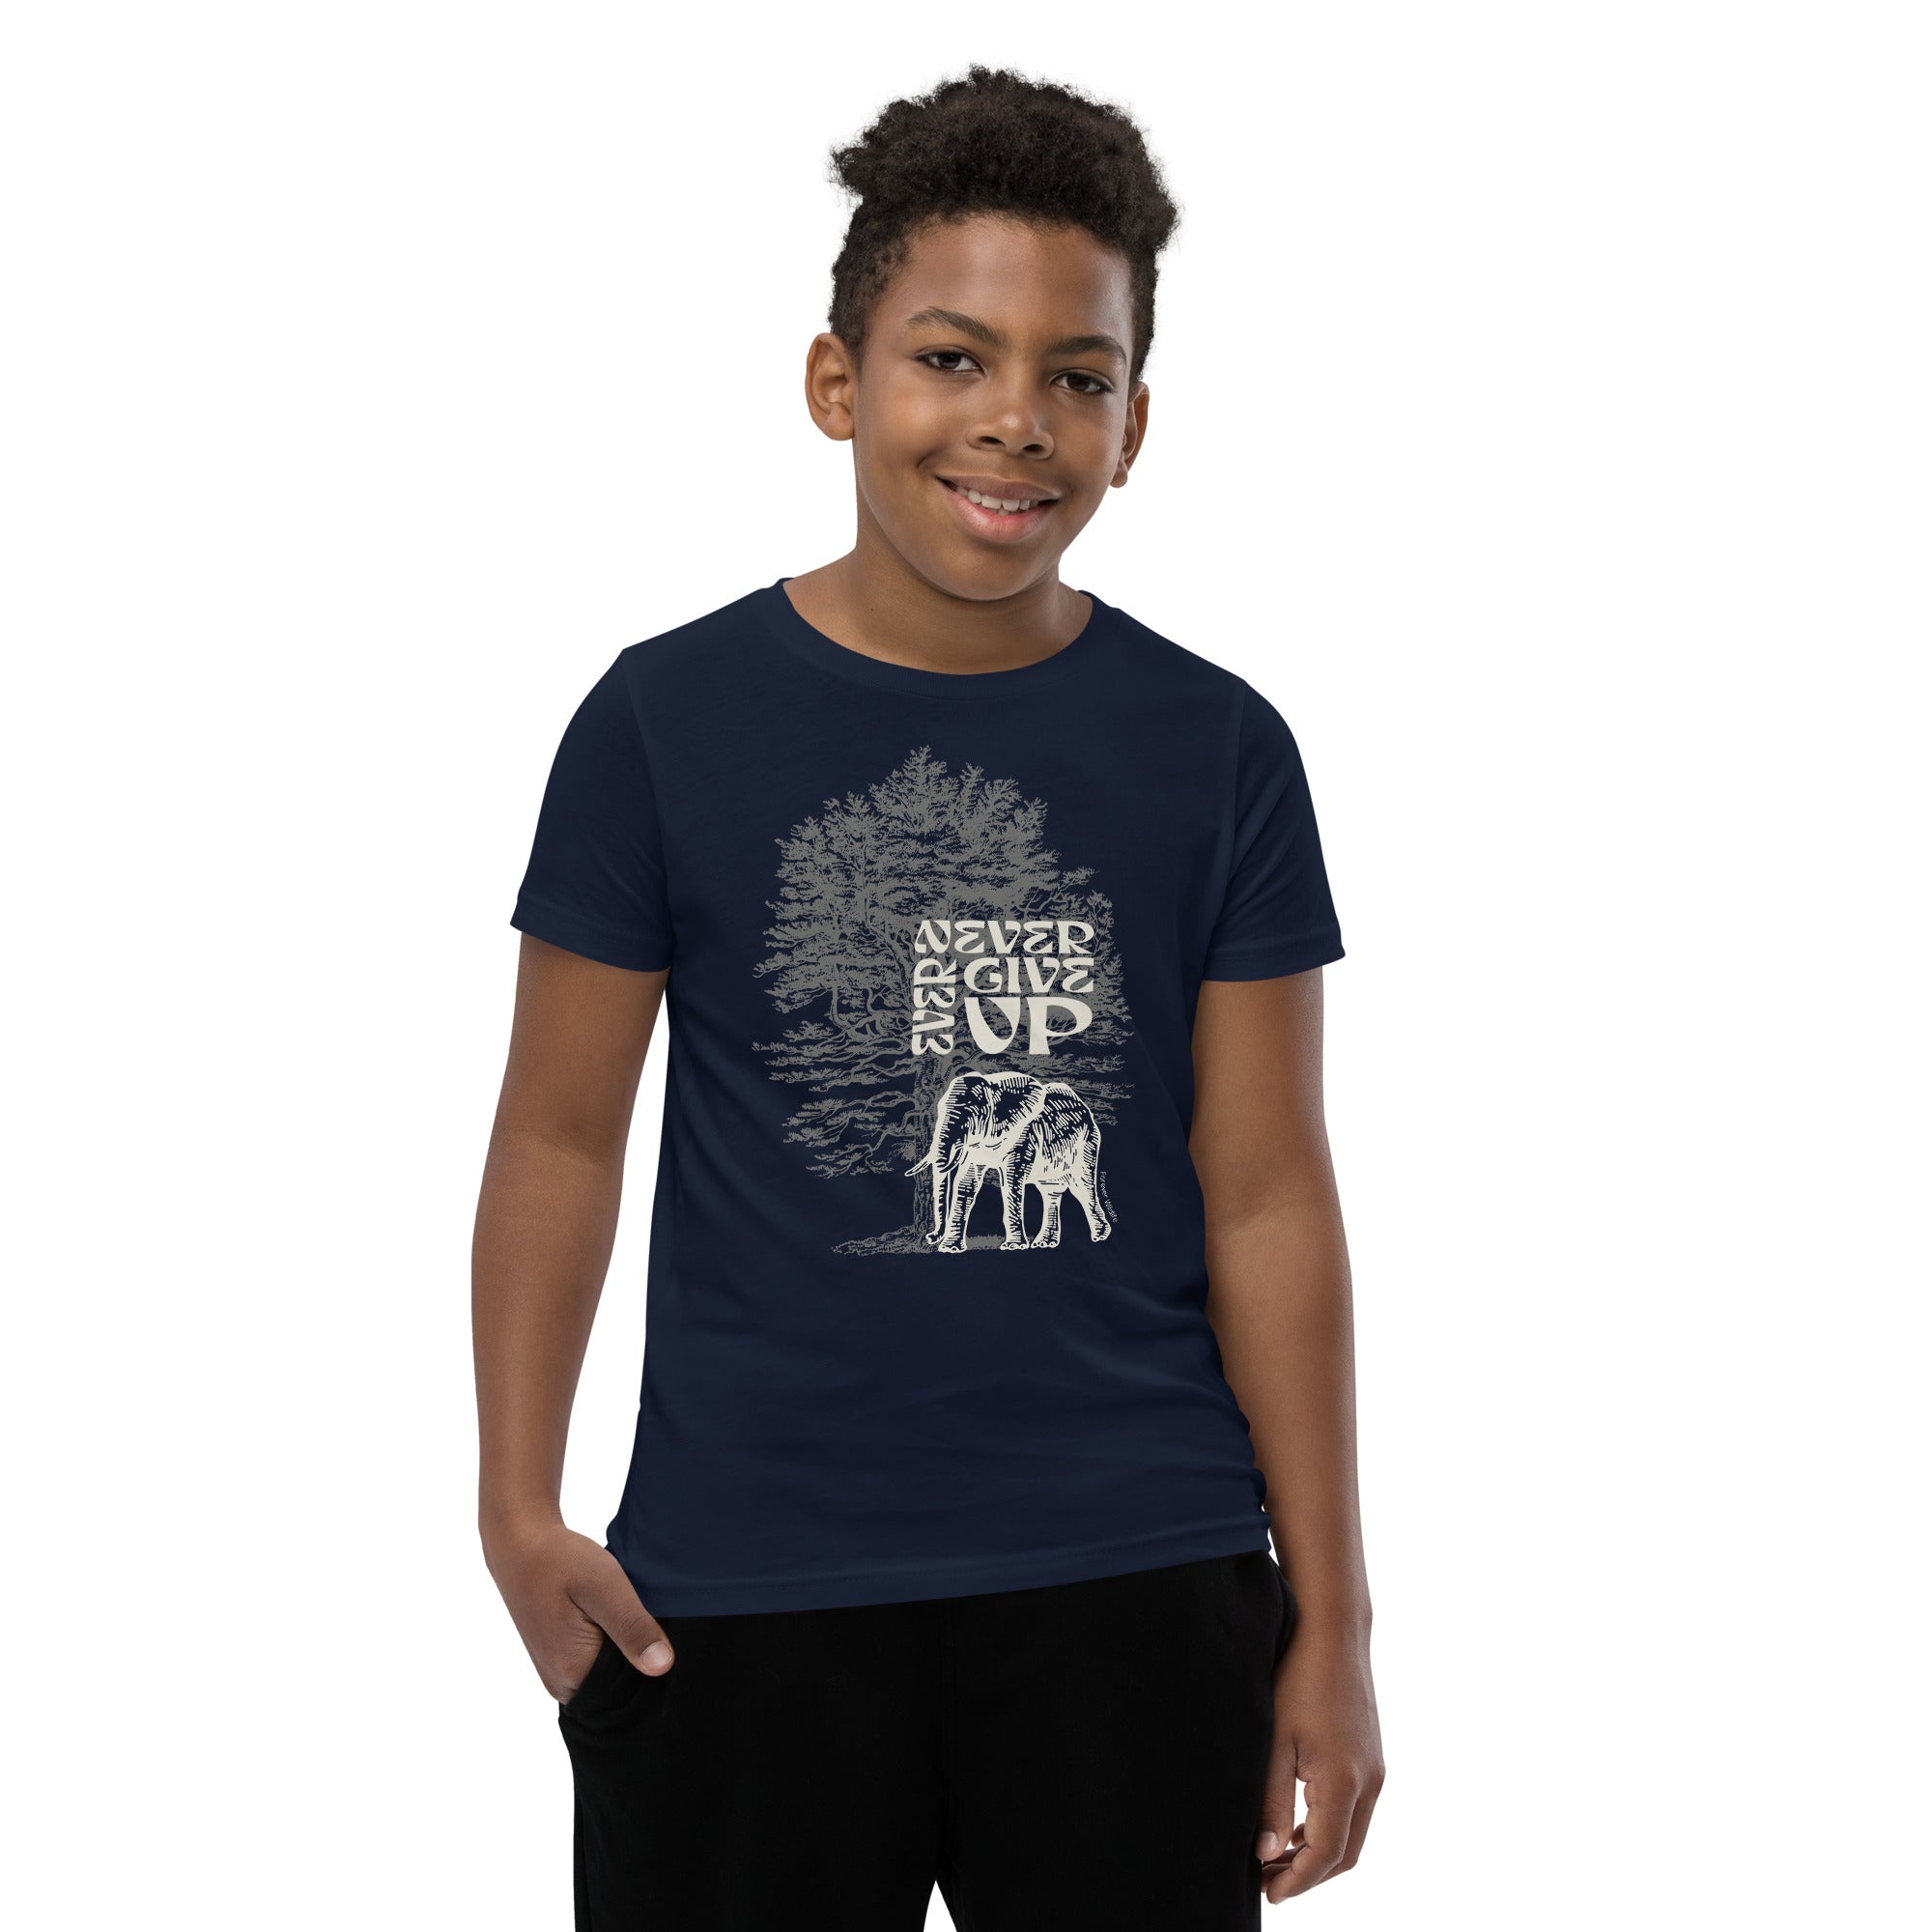 Teen wearing Navy Elephant Youth T-Shirt with Elephant graphic as part of Wildlife T Shirts, Wildlife Clothing & Apparel by Forever Wildlife